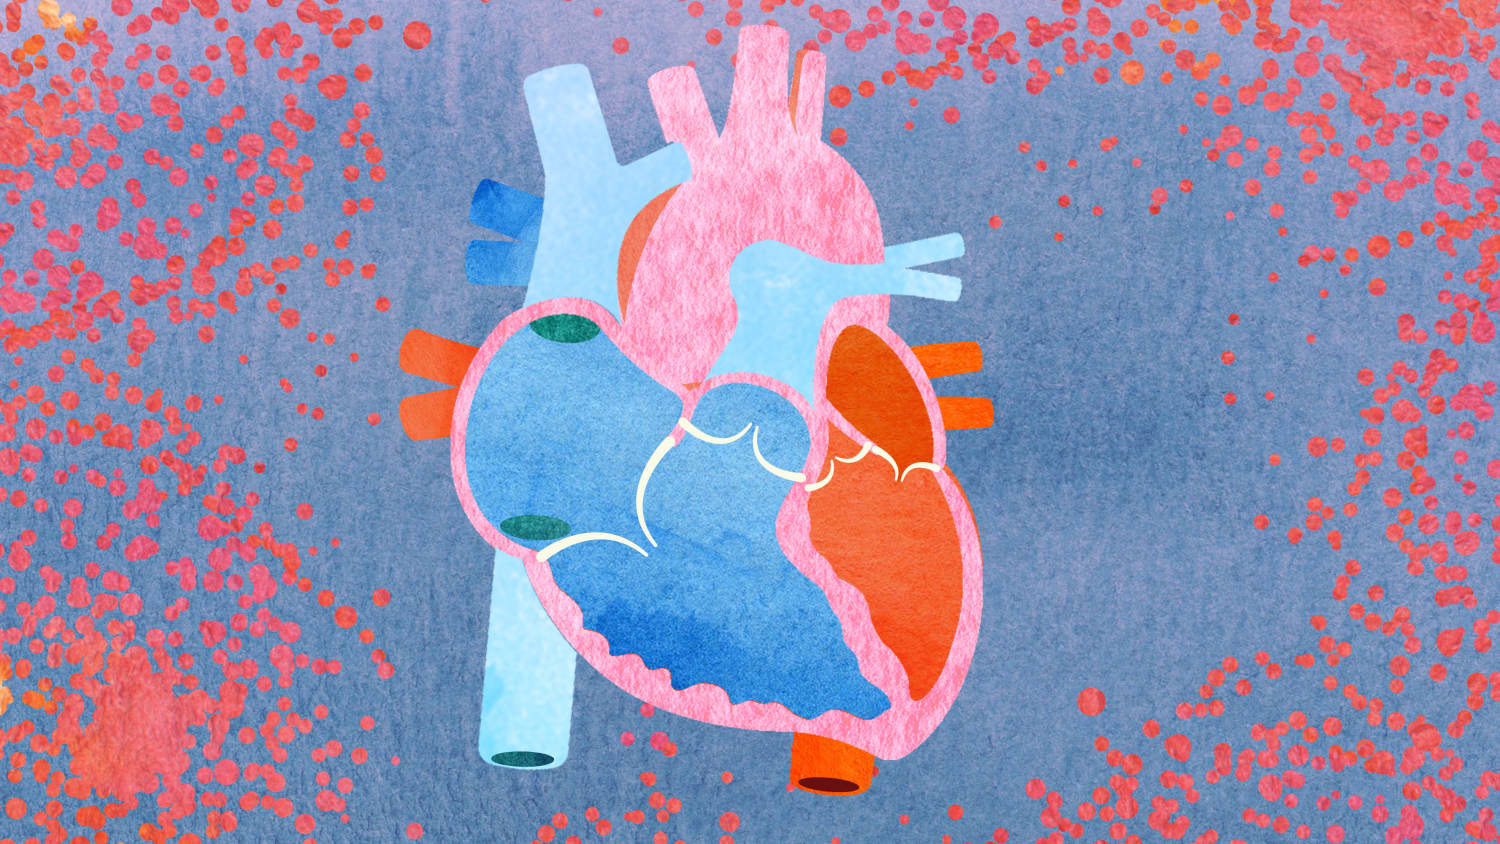 Heart illustration focusing on cardio-oncology